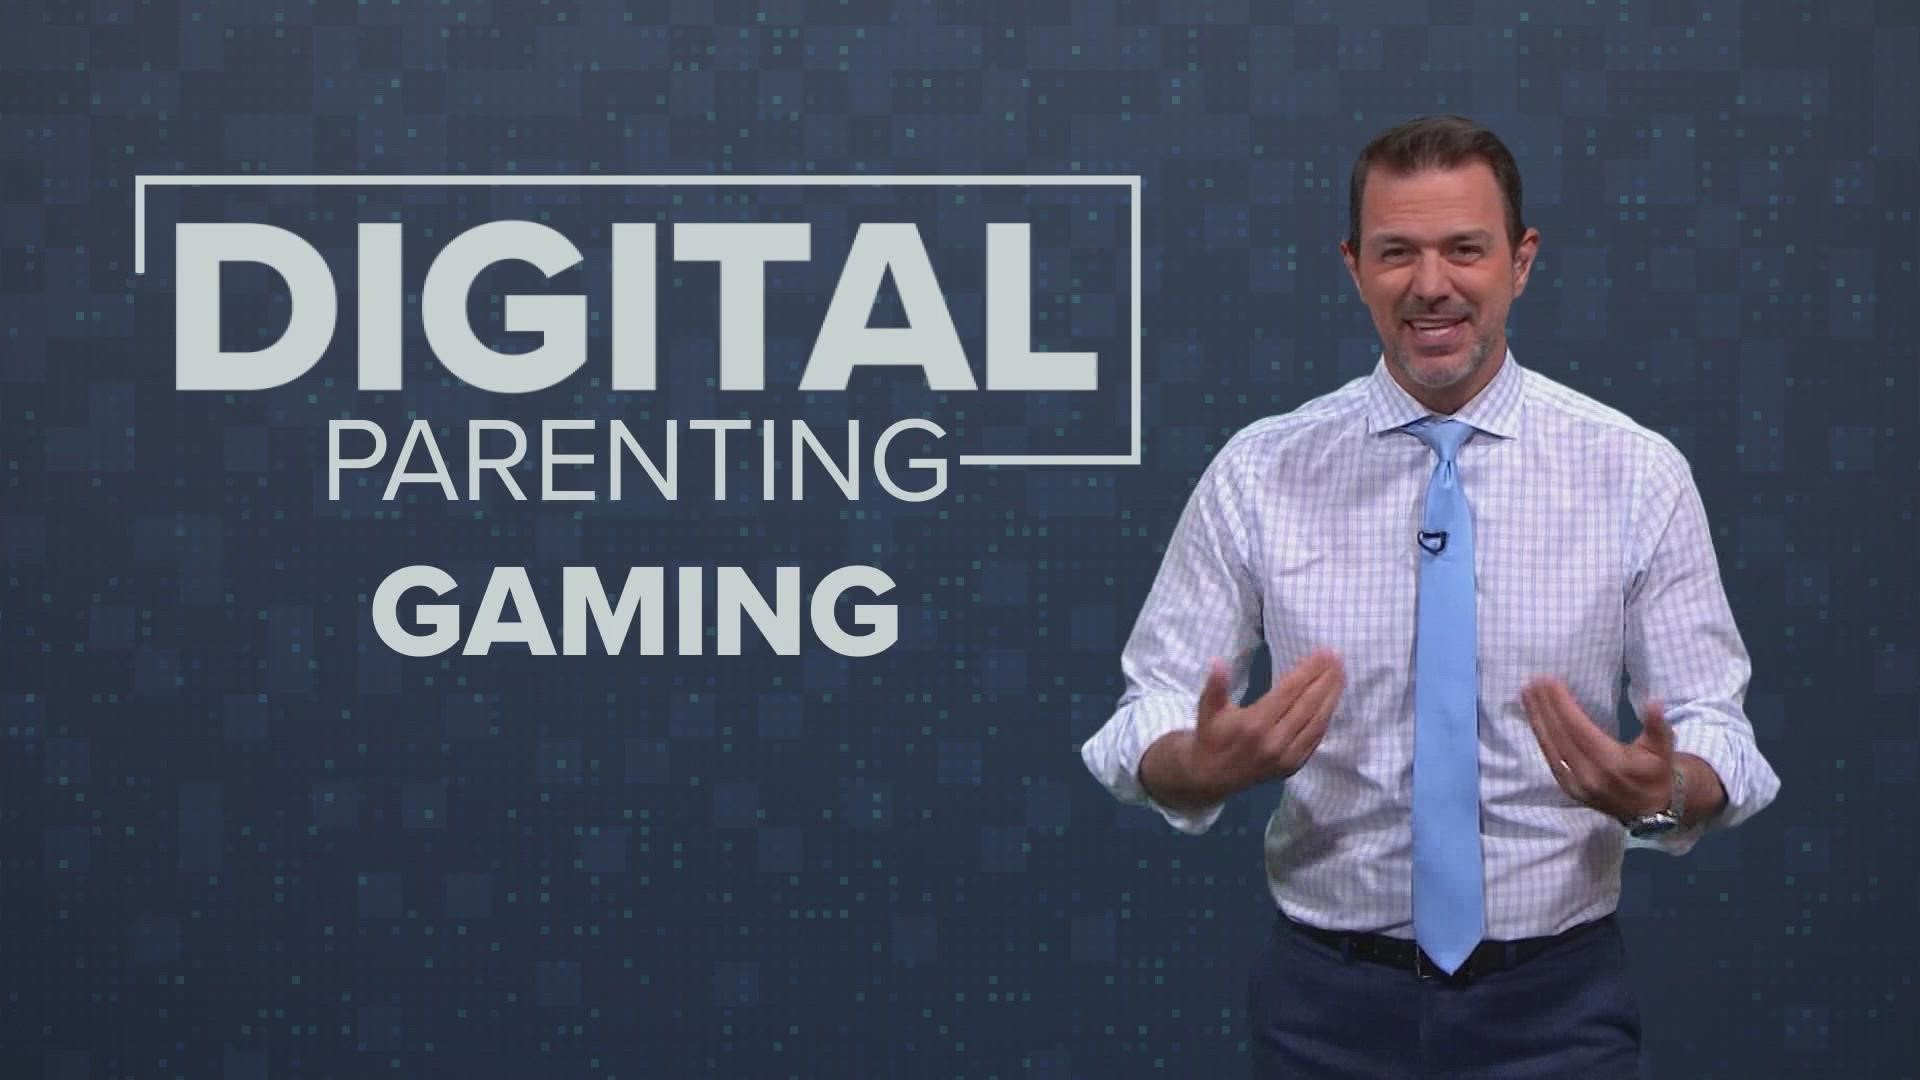 There's no shortage of gaming these days. Here's how parents can make informed decisions about the games they're playing.